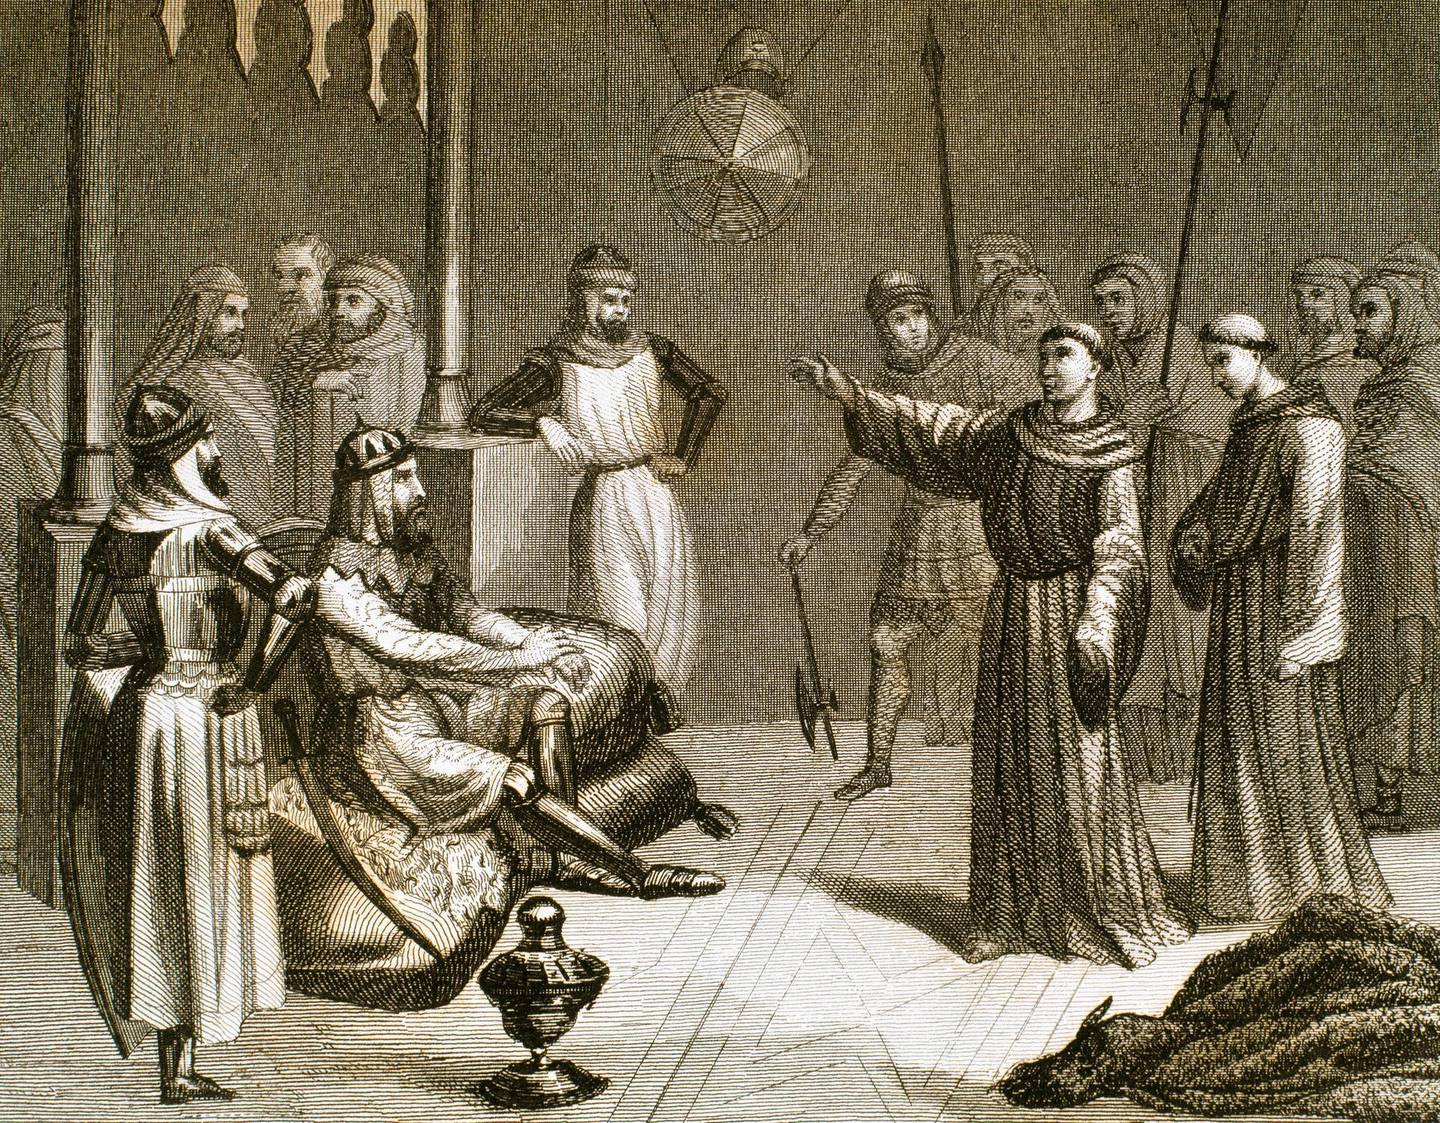 Meeting between St. Francis of Assisi (1181/1182-1226) and Sultan Malek-el-Kamel (1180-1238) in Damietta (Egypt). Engraving, 1851. (Photo by Ipsumpix/Corbis via Getty Images)